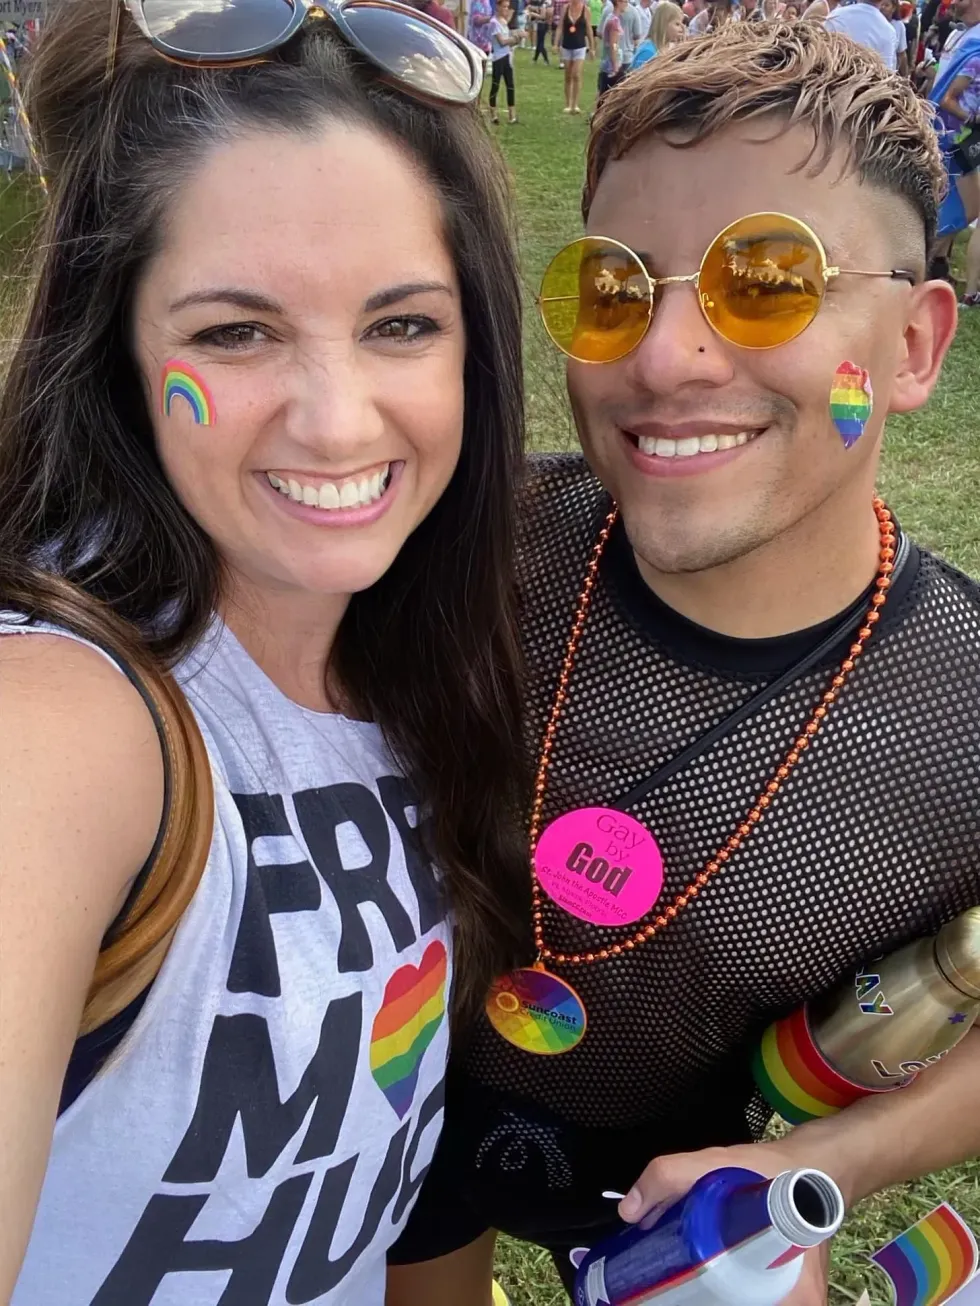 Two people smiling together wearing Pride gear